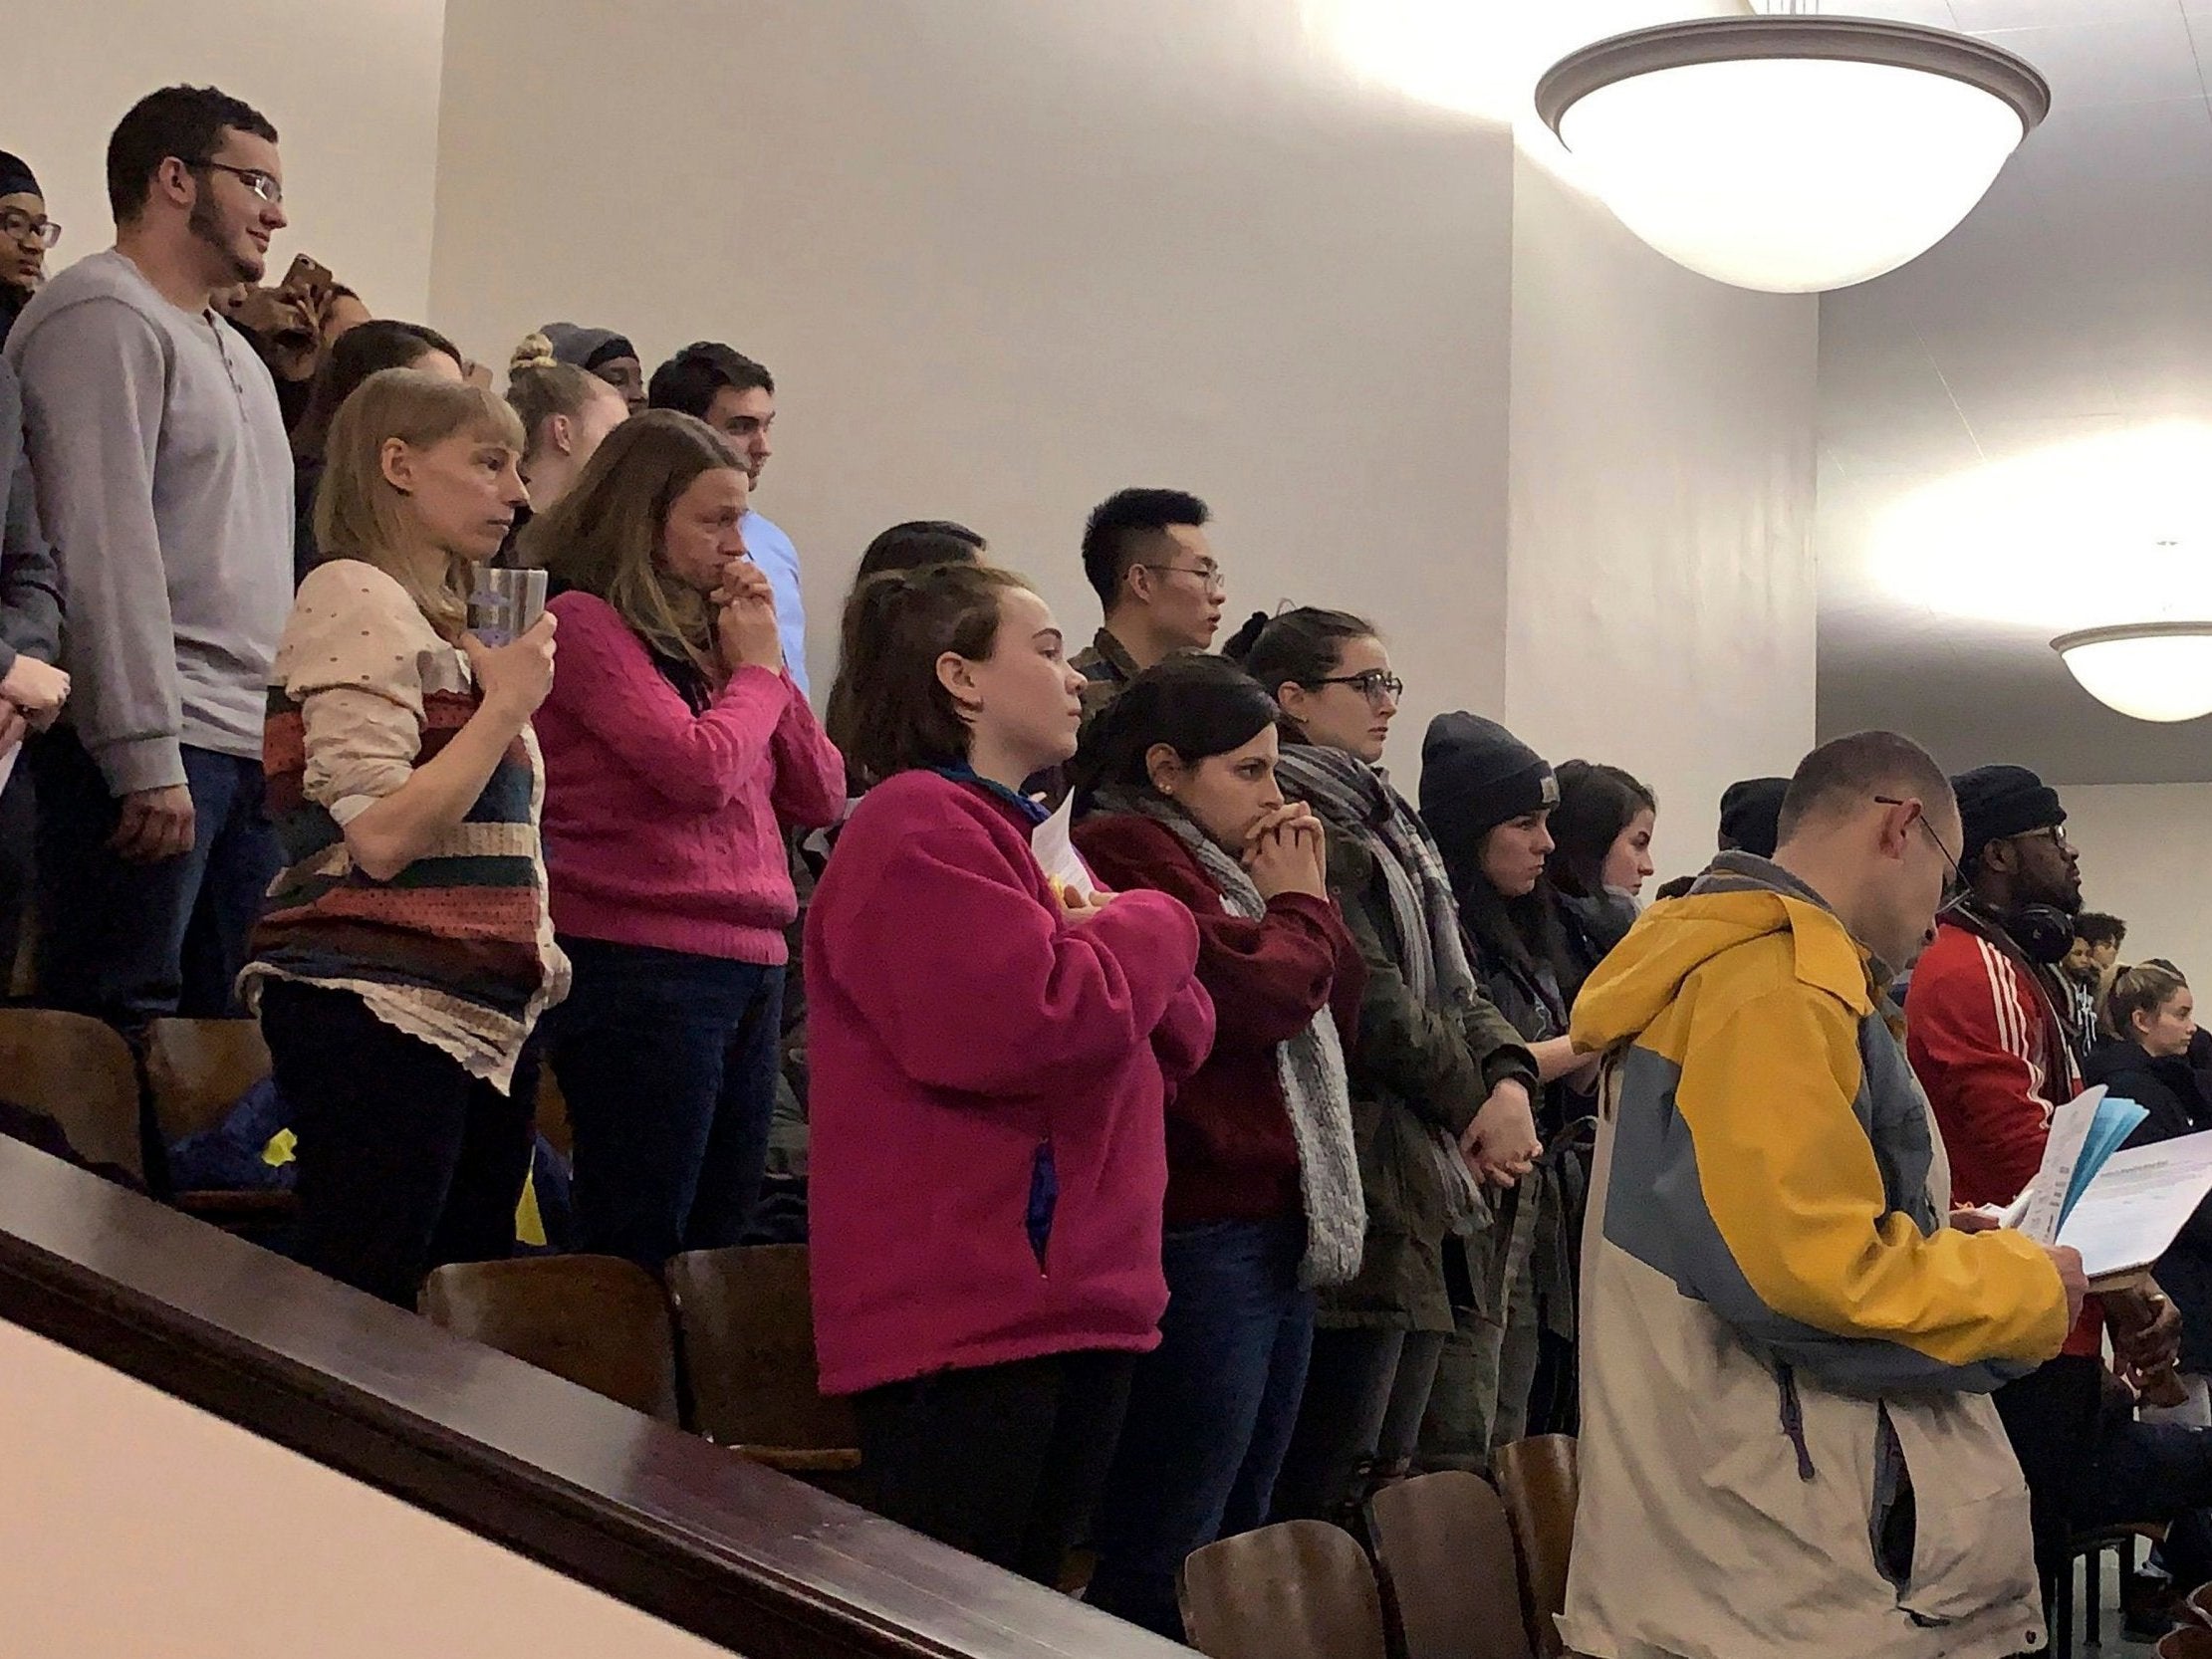 Members of the public fill pack out seats at a school board meeting at East Middle School, Binghamton, New York. The community converged to demand answers after reports four girls were strip-searched by the school because they seemed 'giddy'.